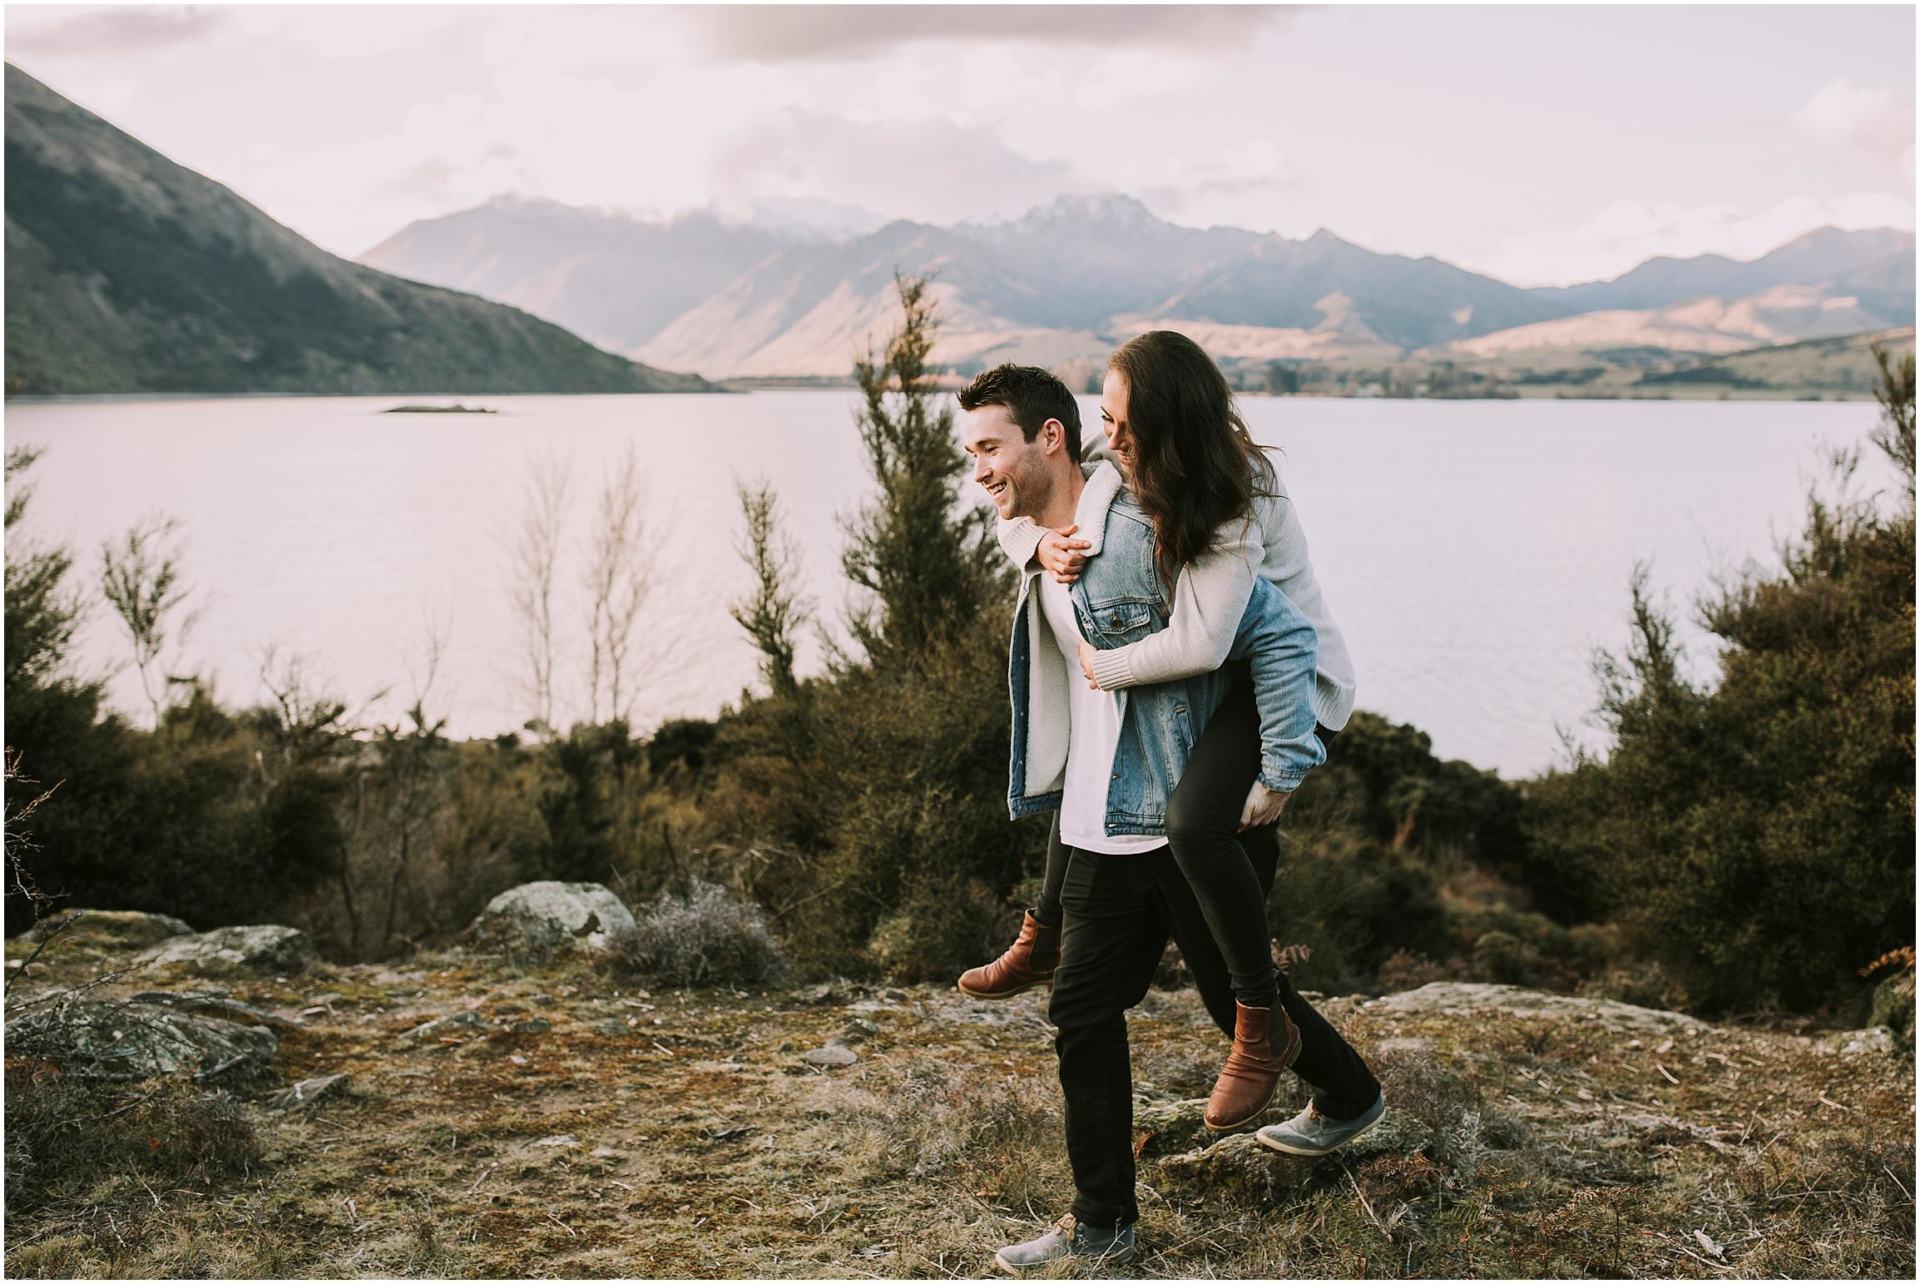 Charlotte Kiri Photography - Engagement Photography with a happy woman taking a piggyback ride on her smiling partner in front of a stunning lake with gorgeous mountainous terrain behind in Wanaka, New Zealand